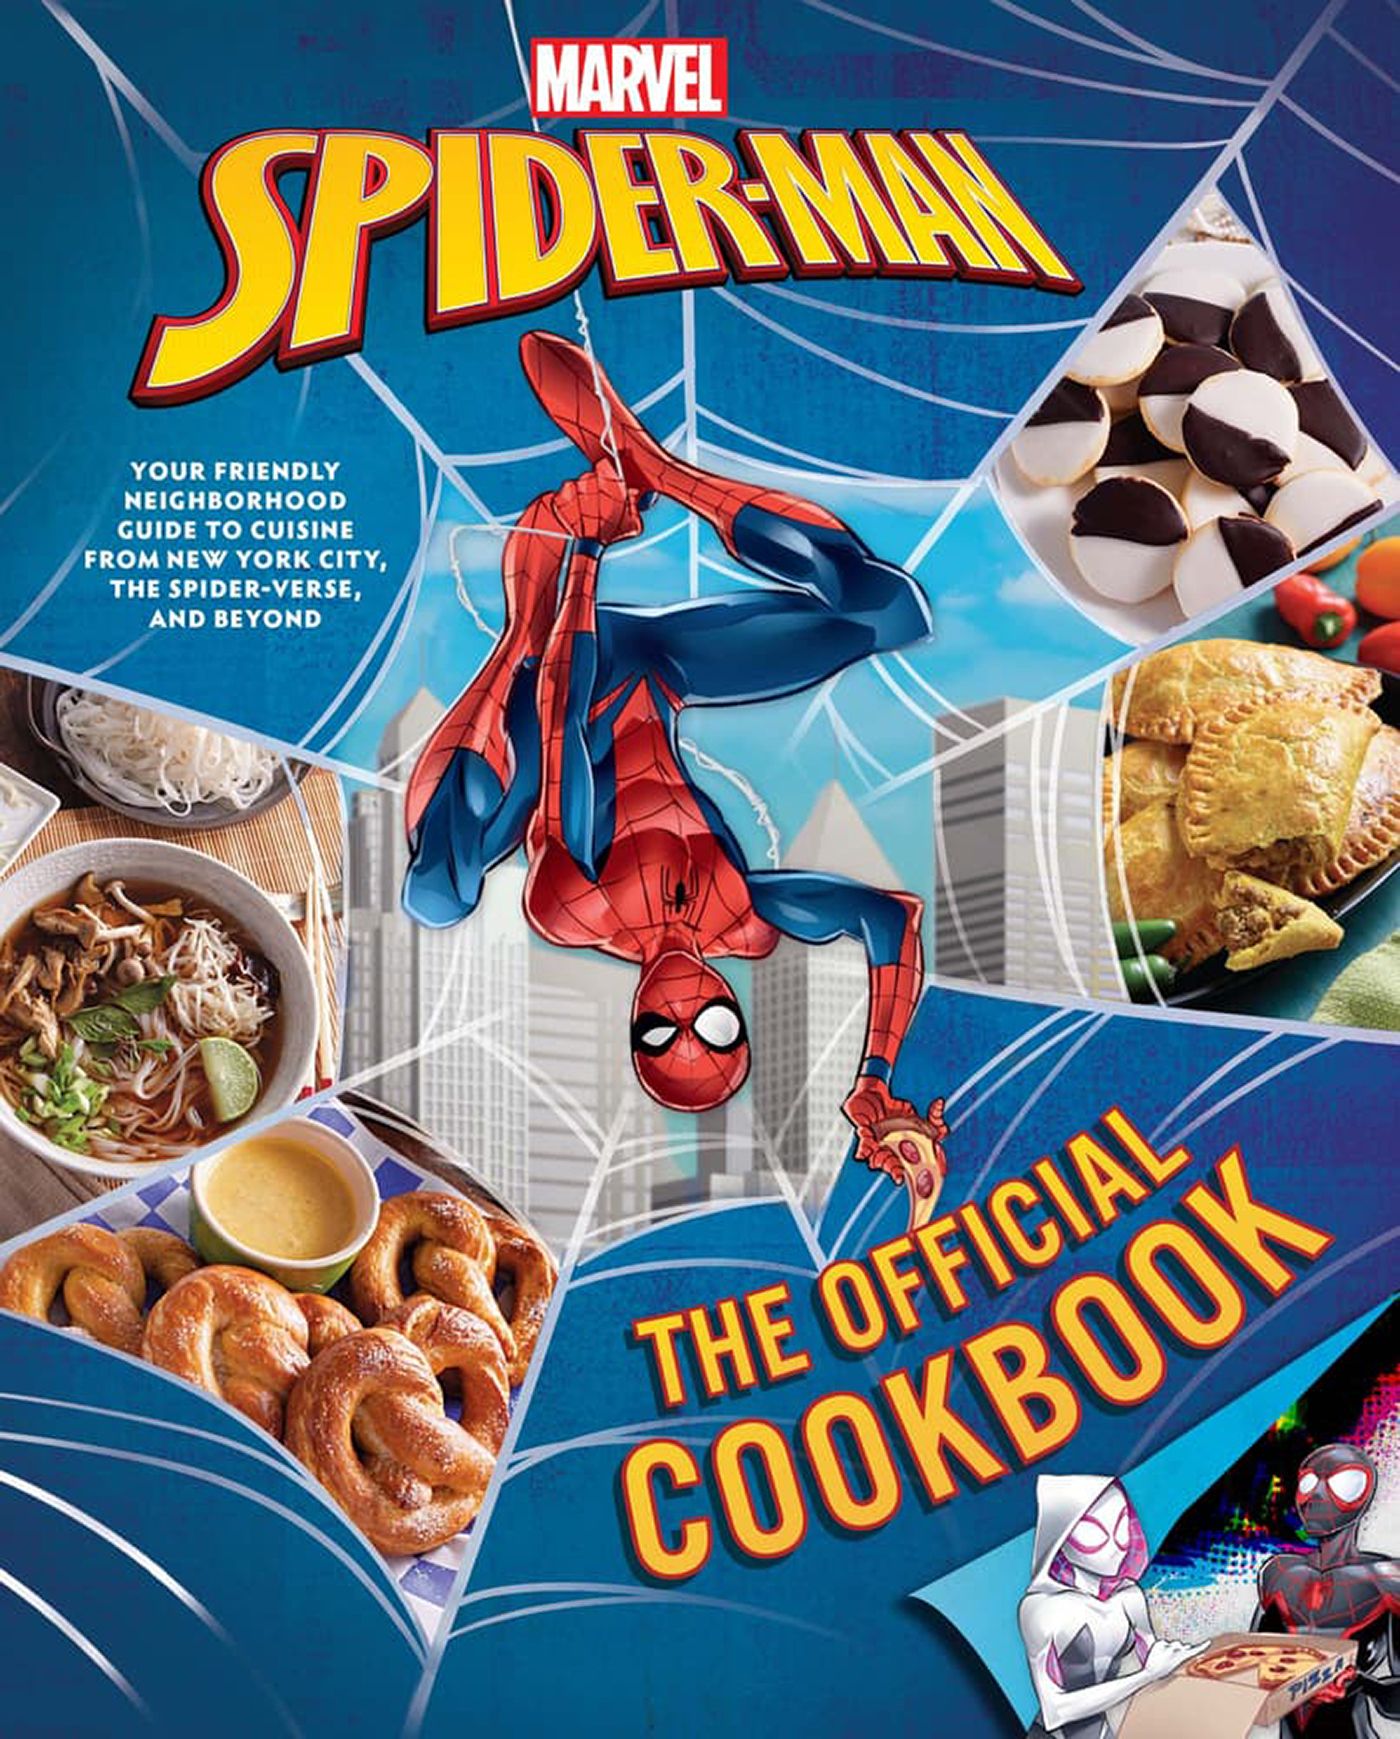 The cover of Marvel: Spider-Man: The Official Cookbook depicts Spider-Man hanging upside down, holding a slice of pizza and surrounded by delicious looking foods.